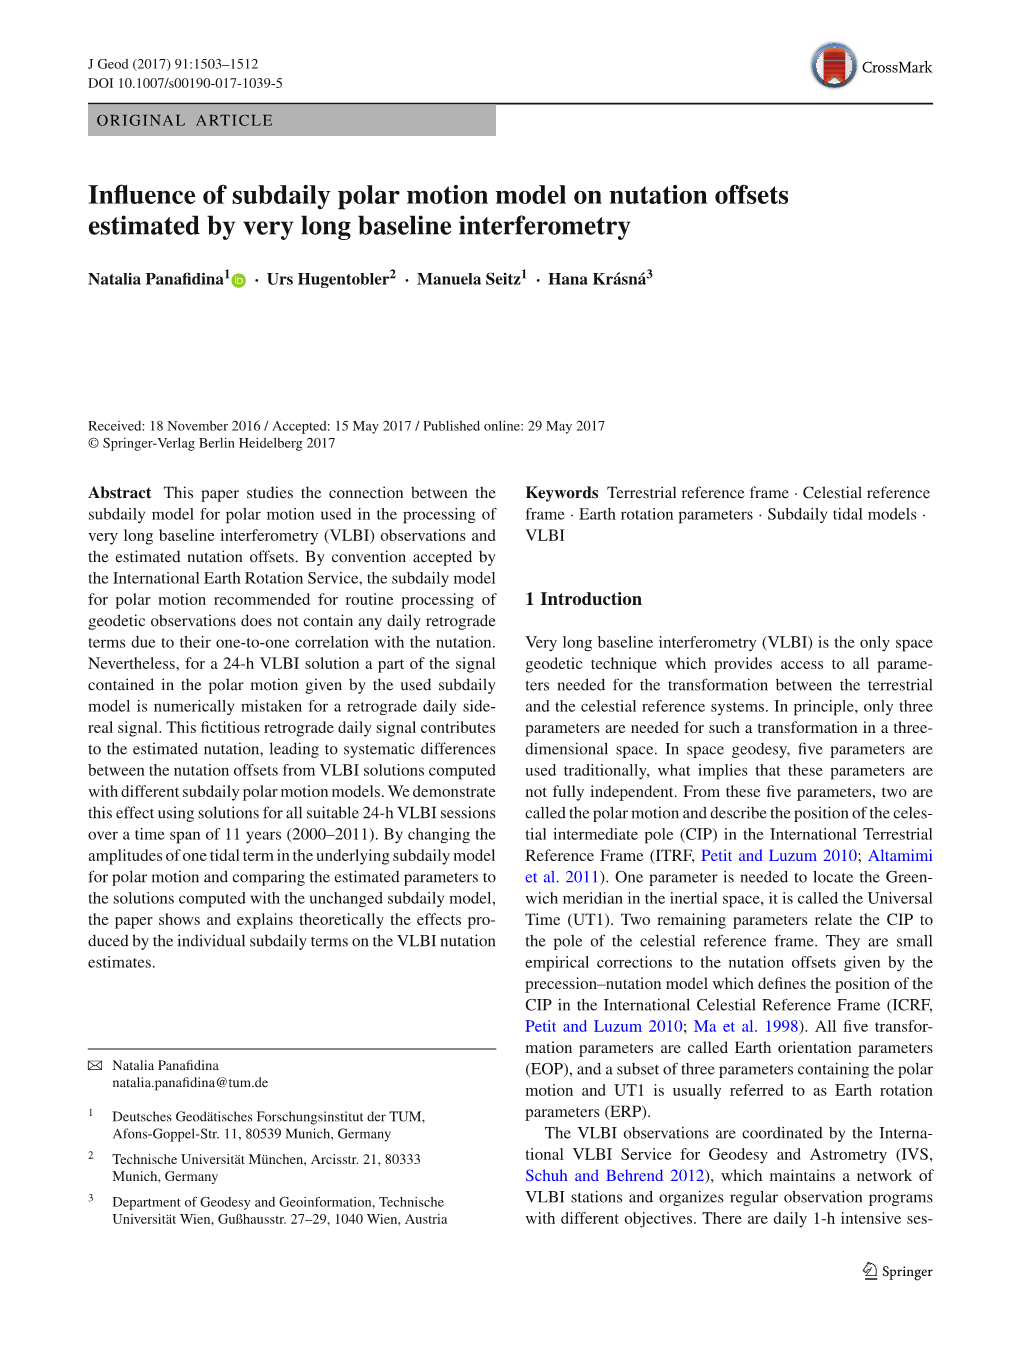 Influence of Subdaily Polar Motion Model on Nutation Offsets Estimated by Very Long Baseline Interferometry